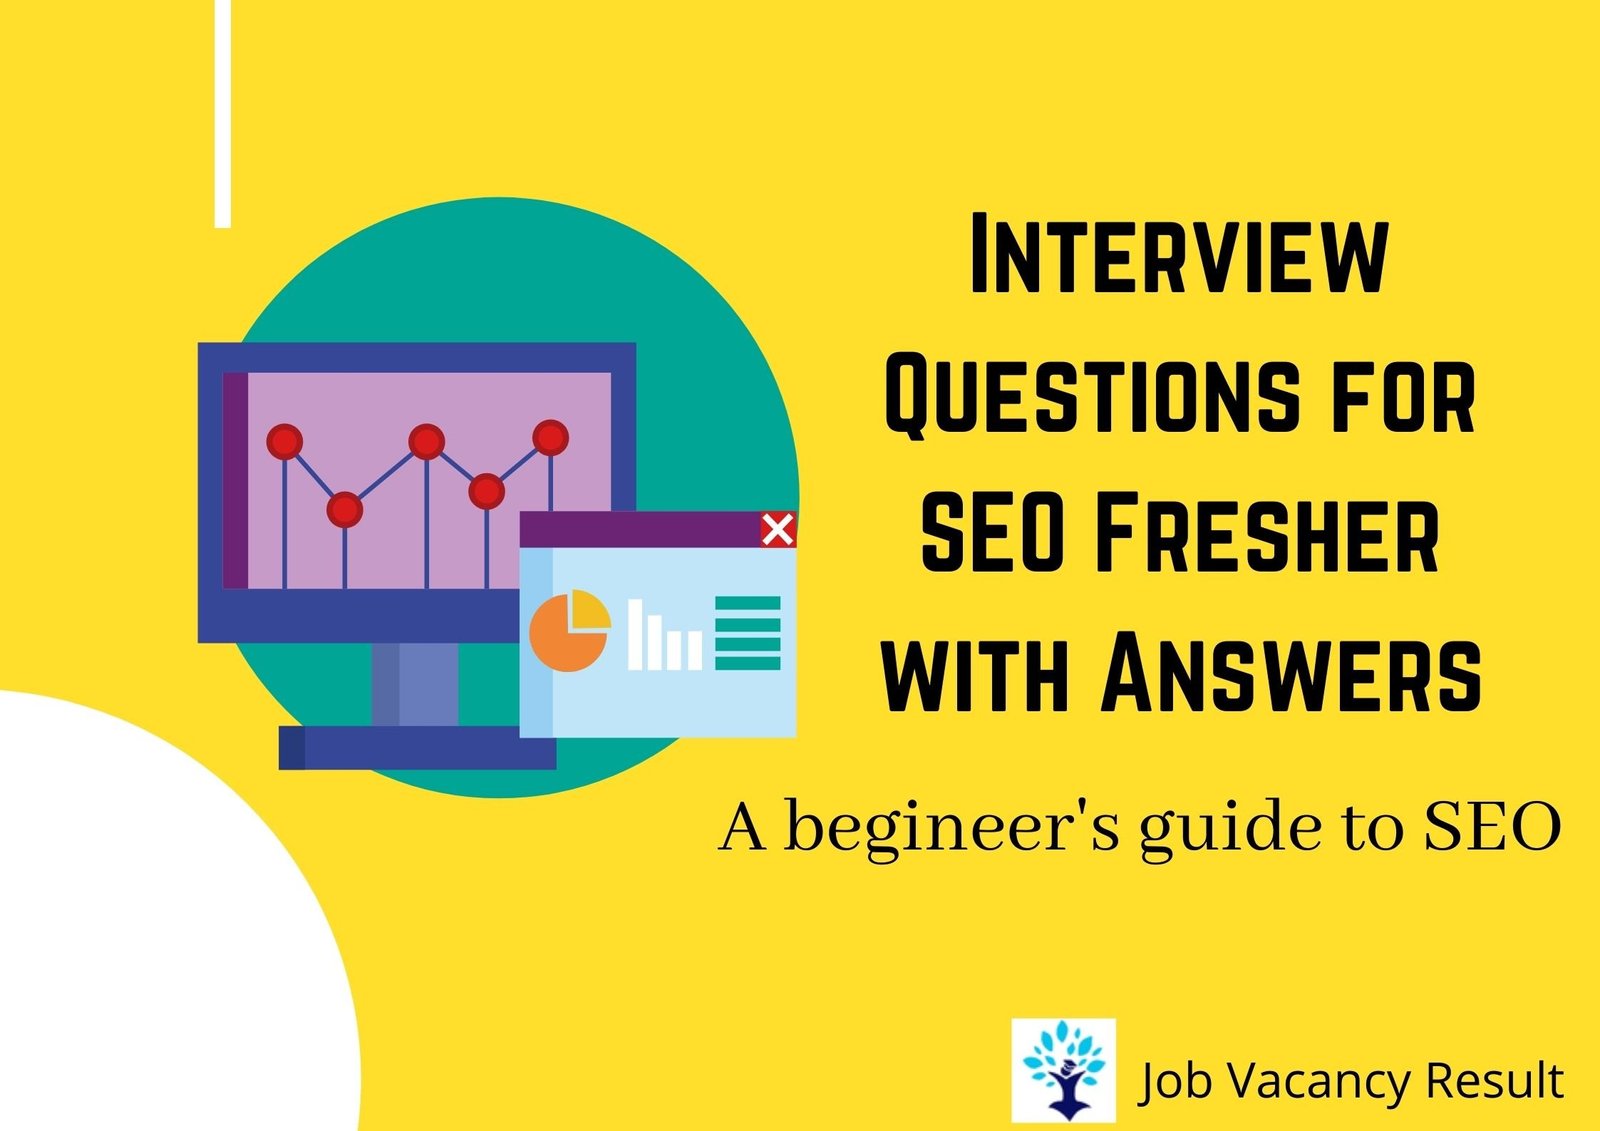 Interview Questions for SEO Fresher with Answers